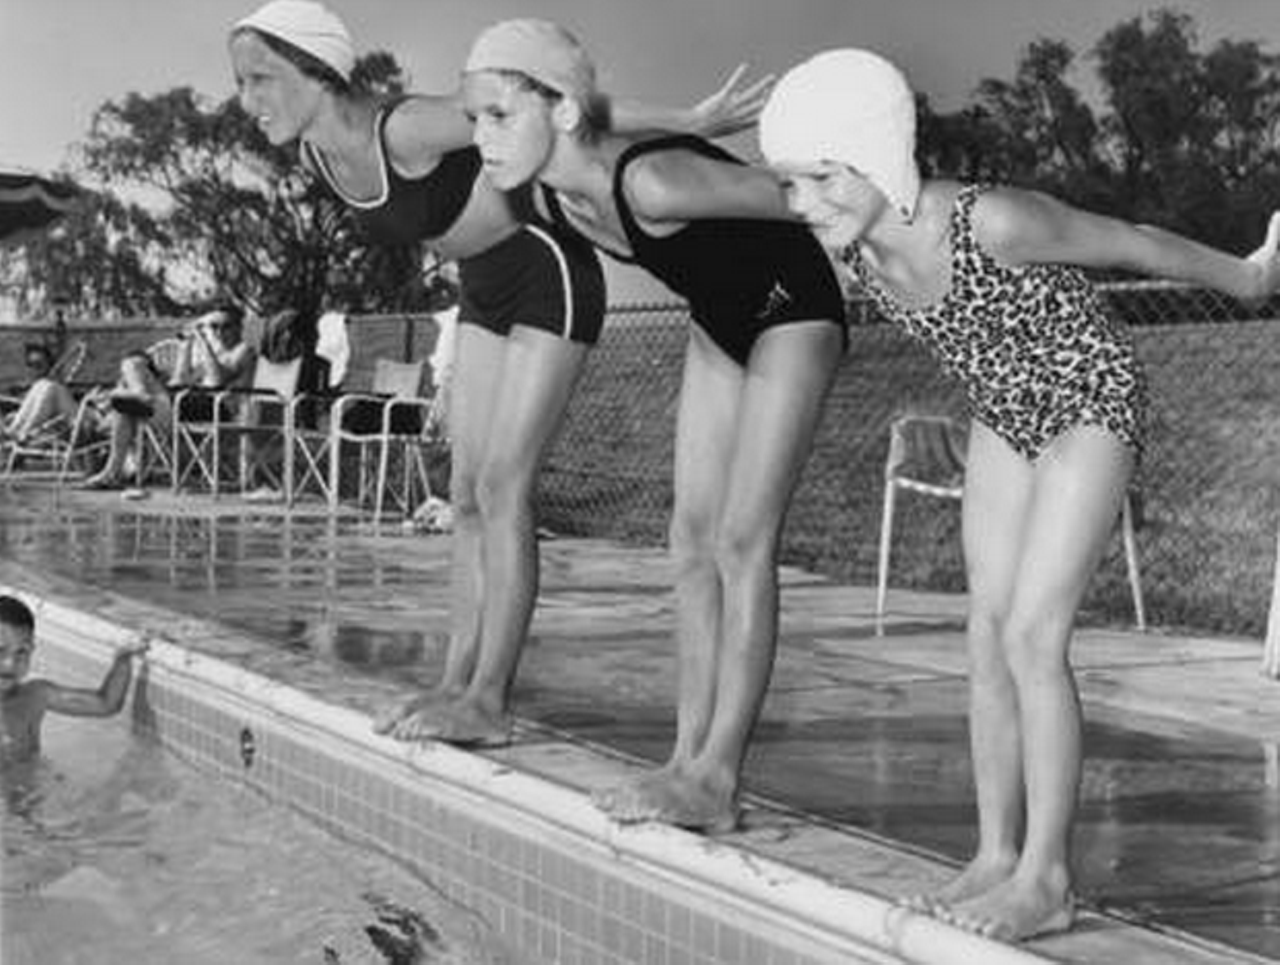 Diving practice at Mentor Harbor Yacht Club swimming pool, 1961.